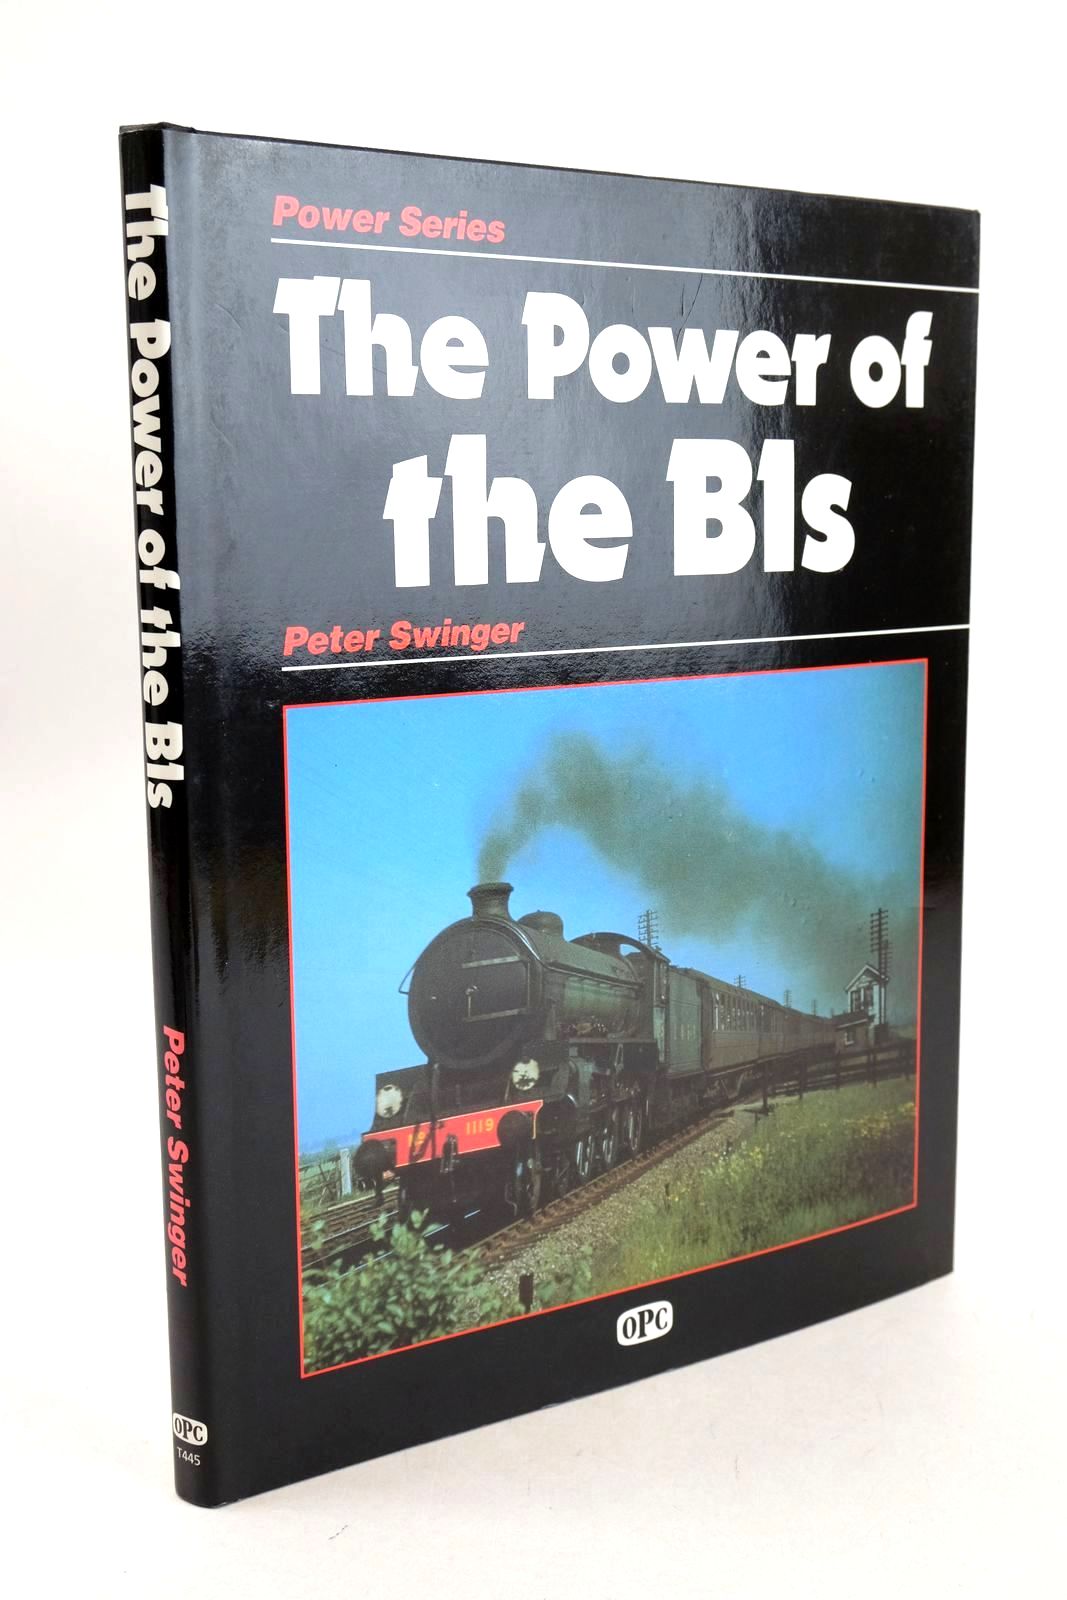 Photo of THE POWER OF THE B1S written by Swinger, Peter published by Oxford Publishing Co (STOCK CODE: 1327082)  for sale by Stella & Rose's Books